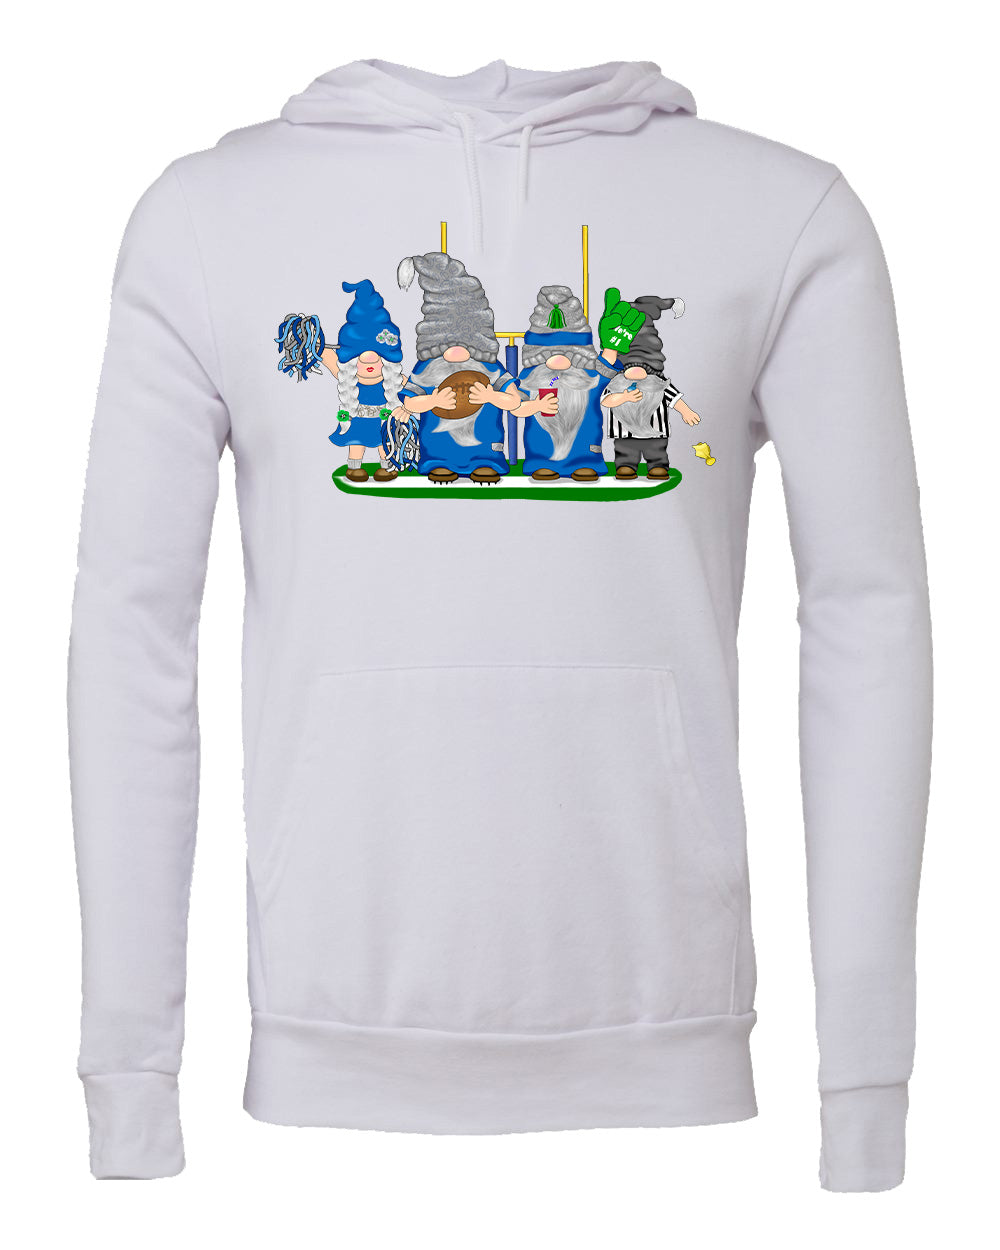 Pacific Blue & Navy Football Gnomes (similar to Seattle) on Unisex Hoodie